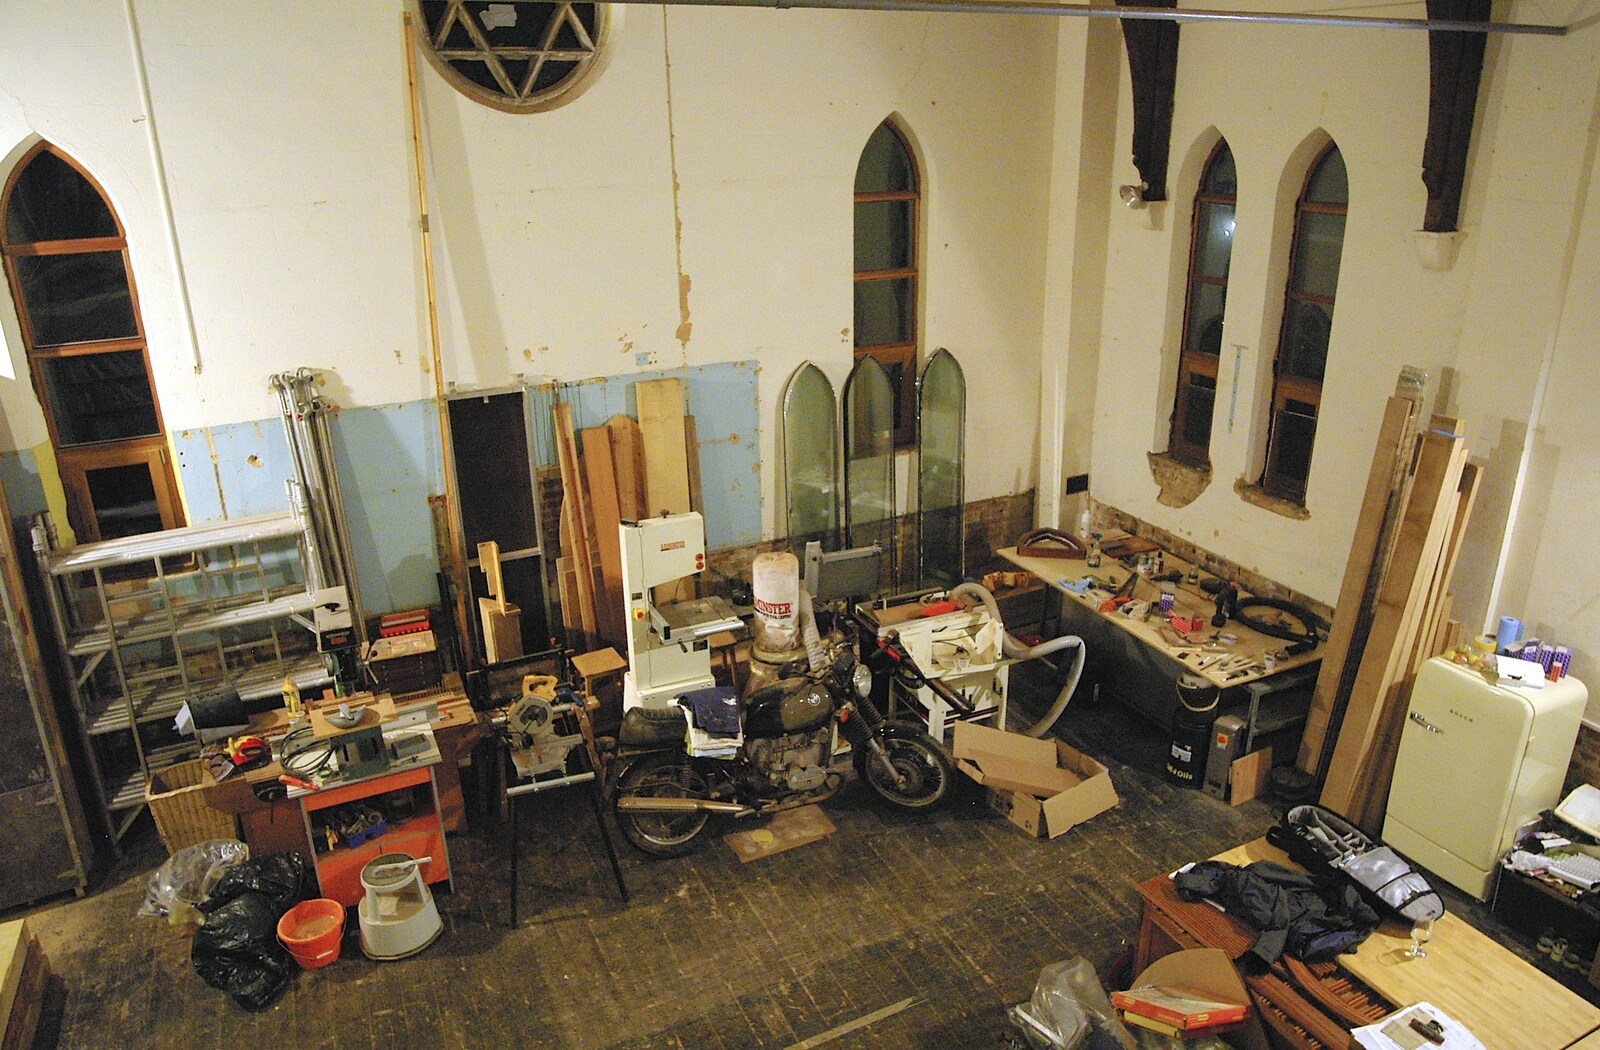 Dom's workshop from the top of the stairs from Dom in da Chapel, Safeway Chickens and Evil Supermarkets, Harleston and Grimston - 15th January 2006